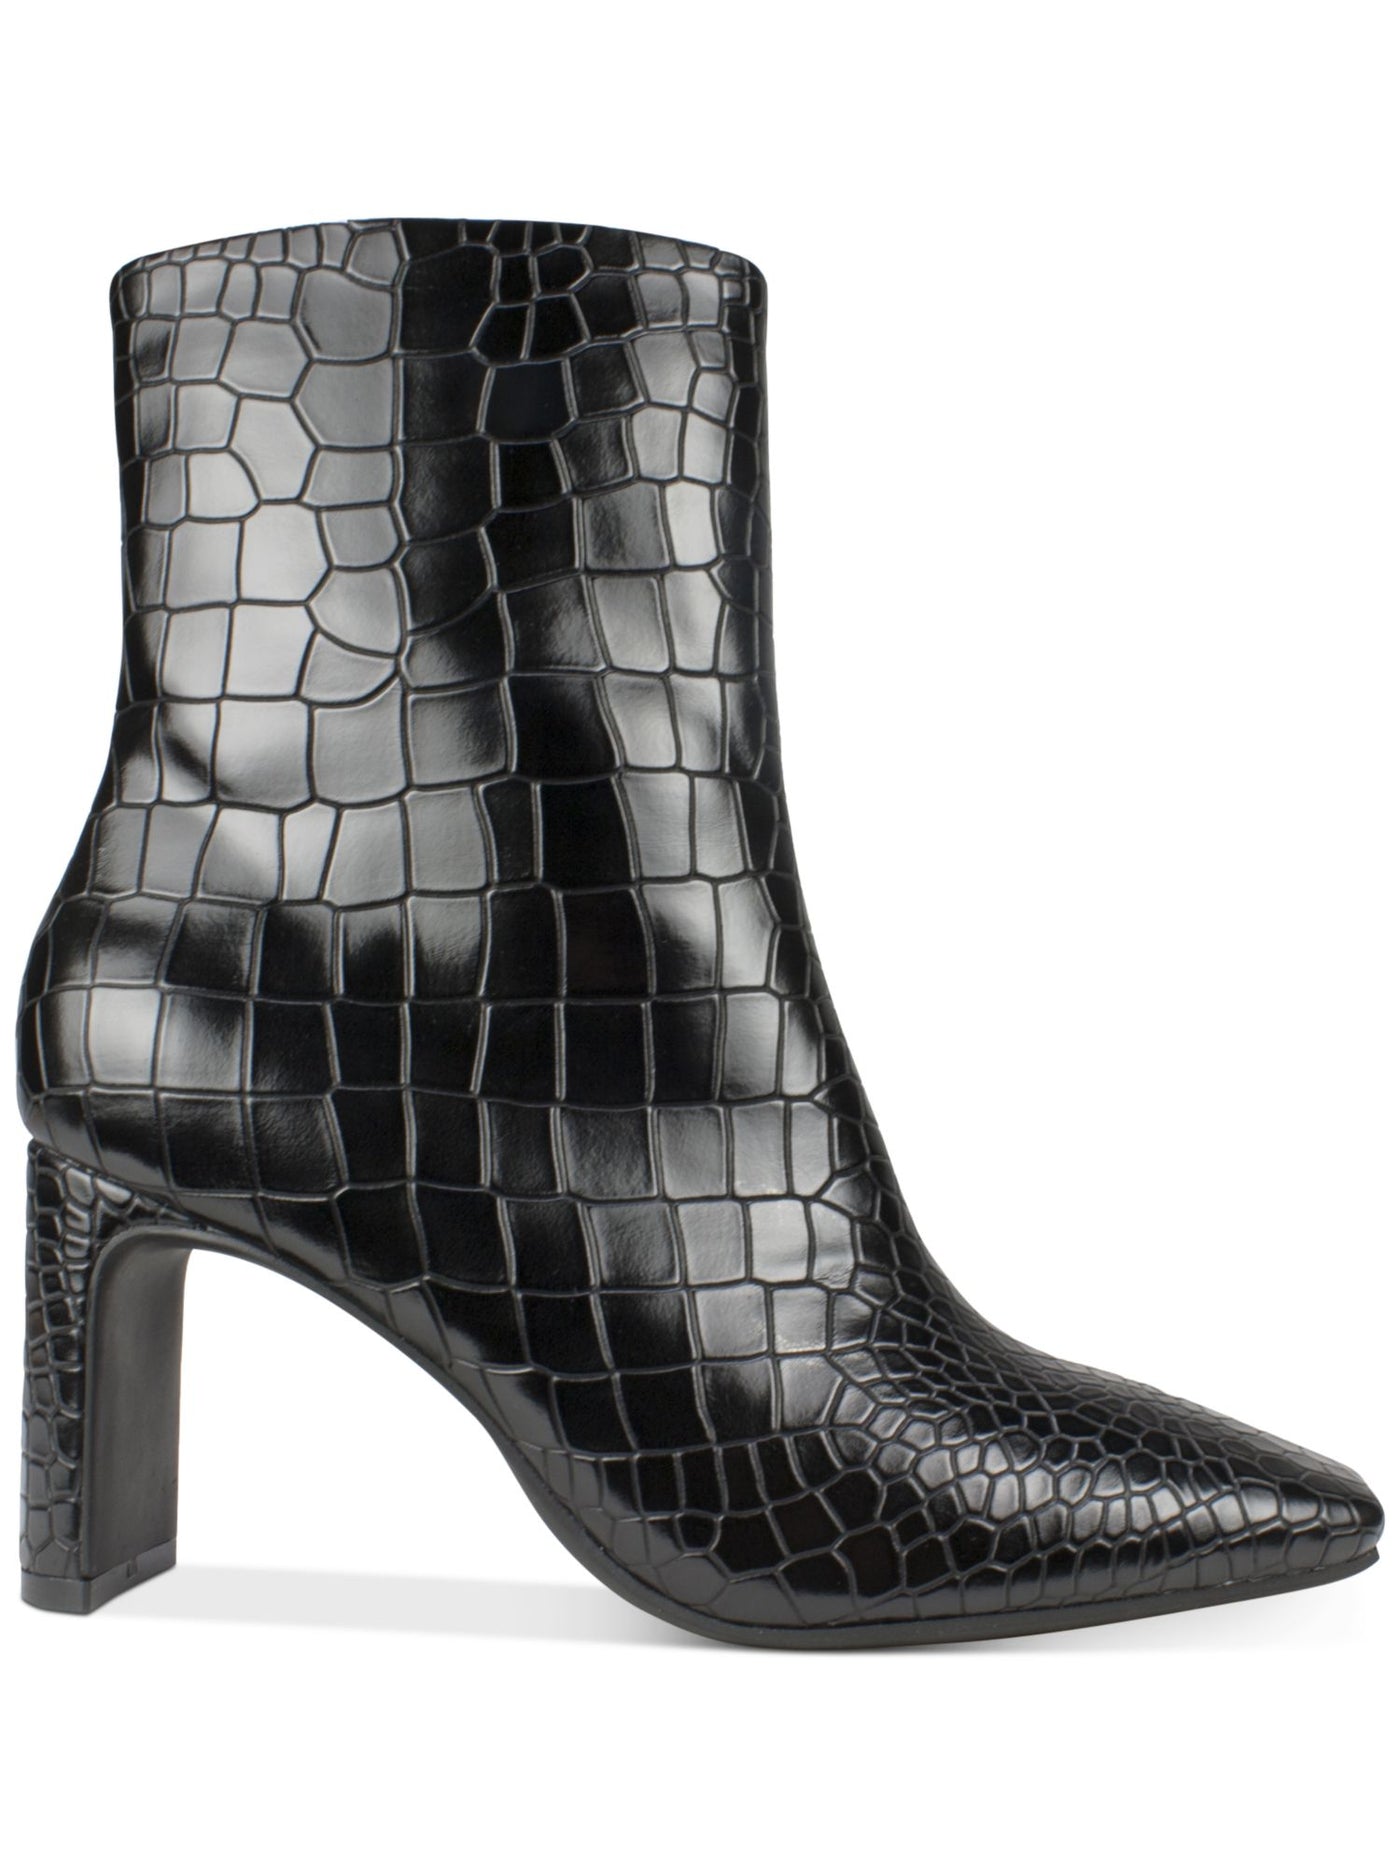 SEVEN DIALS Womens Black Croco Embossed Cushioned Nicole Square Toe Zip-Up Dress Booties 9 M